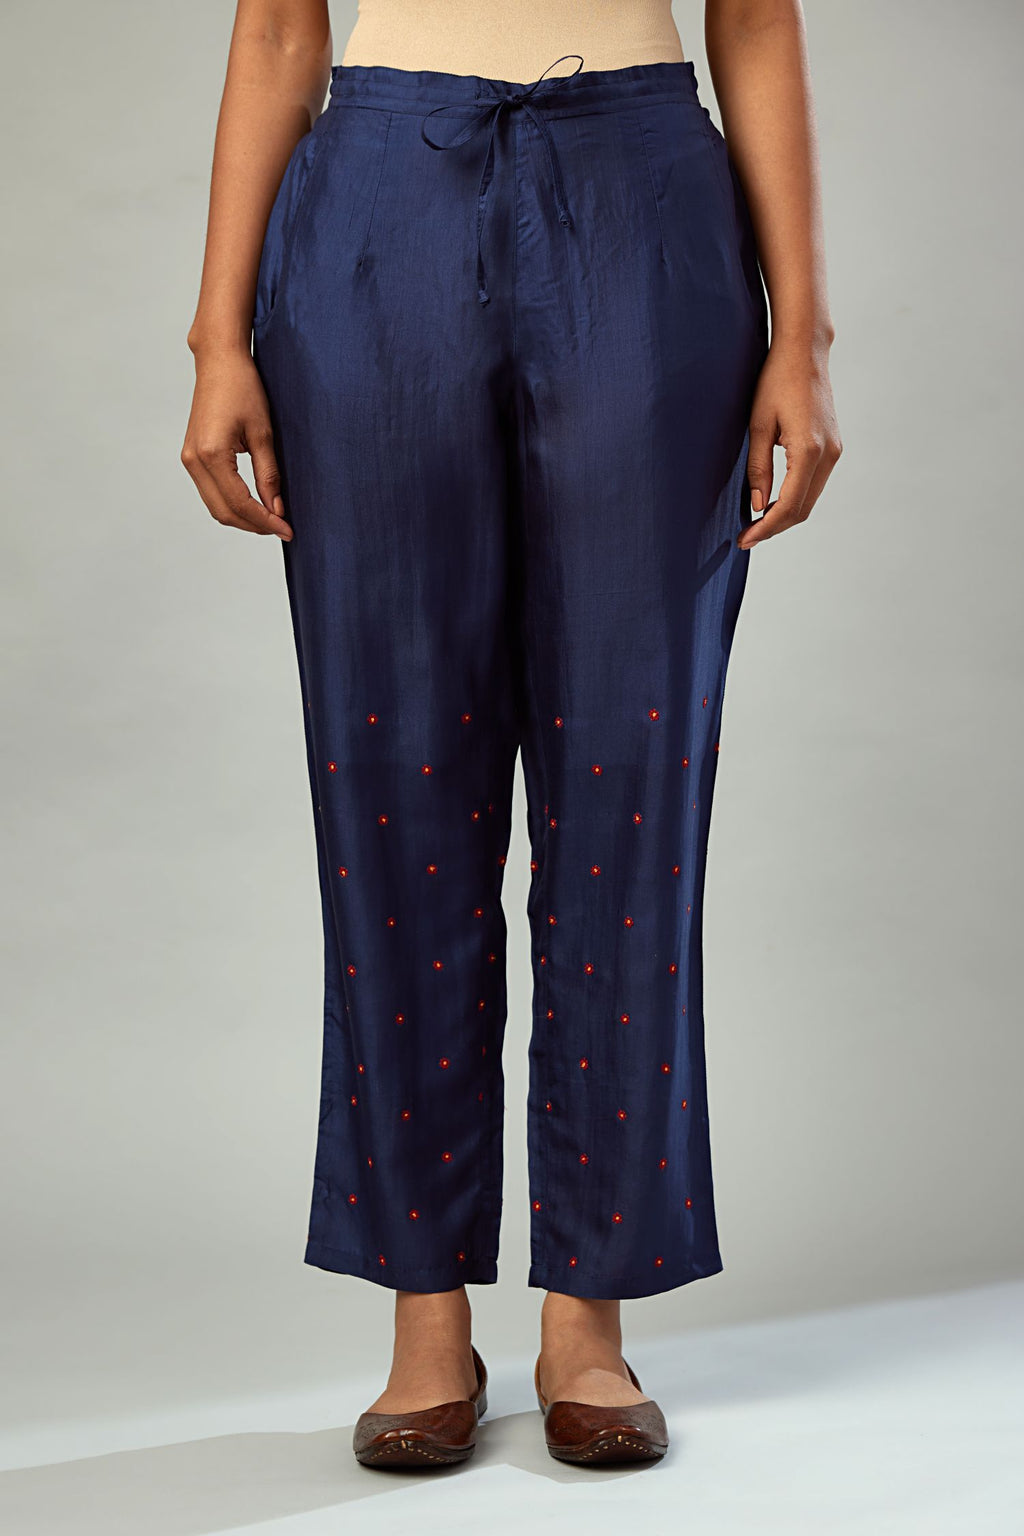 Indigo silk straight pants detailed with small flower embroidery at bottom.